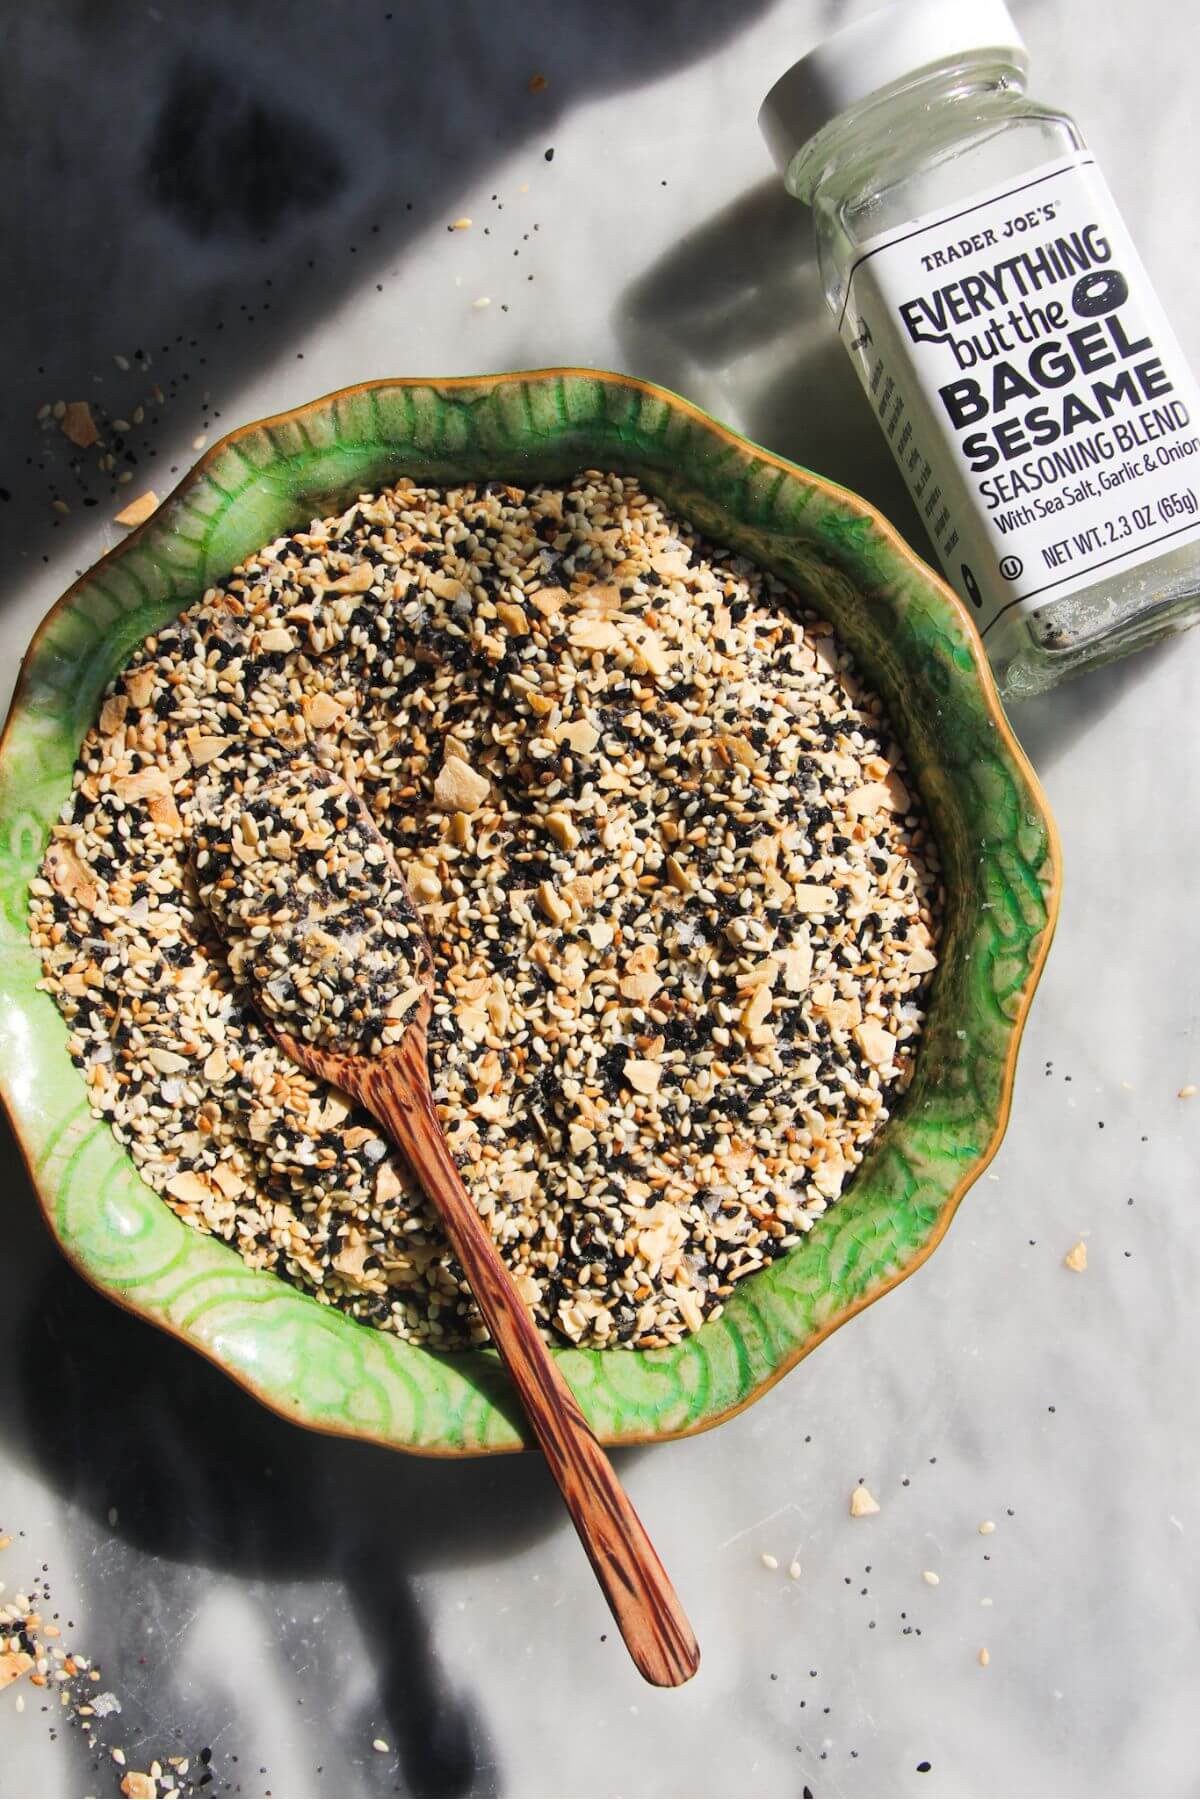 Everything bagel seasoning in a green bowl with a wooden spoon inside.